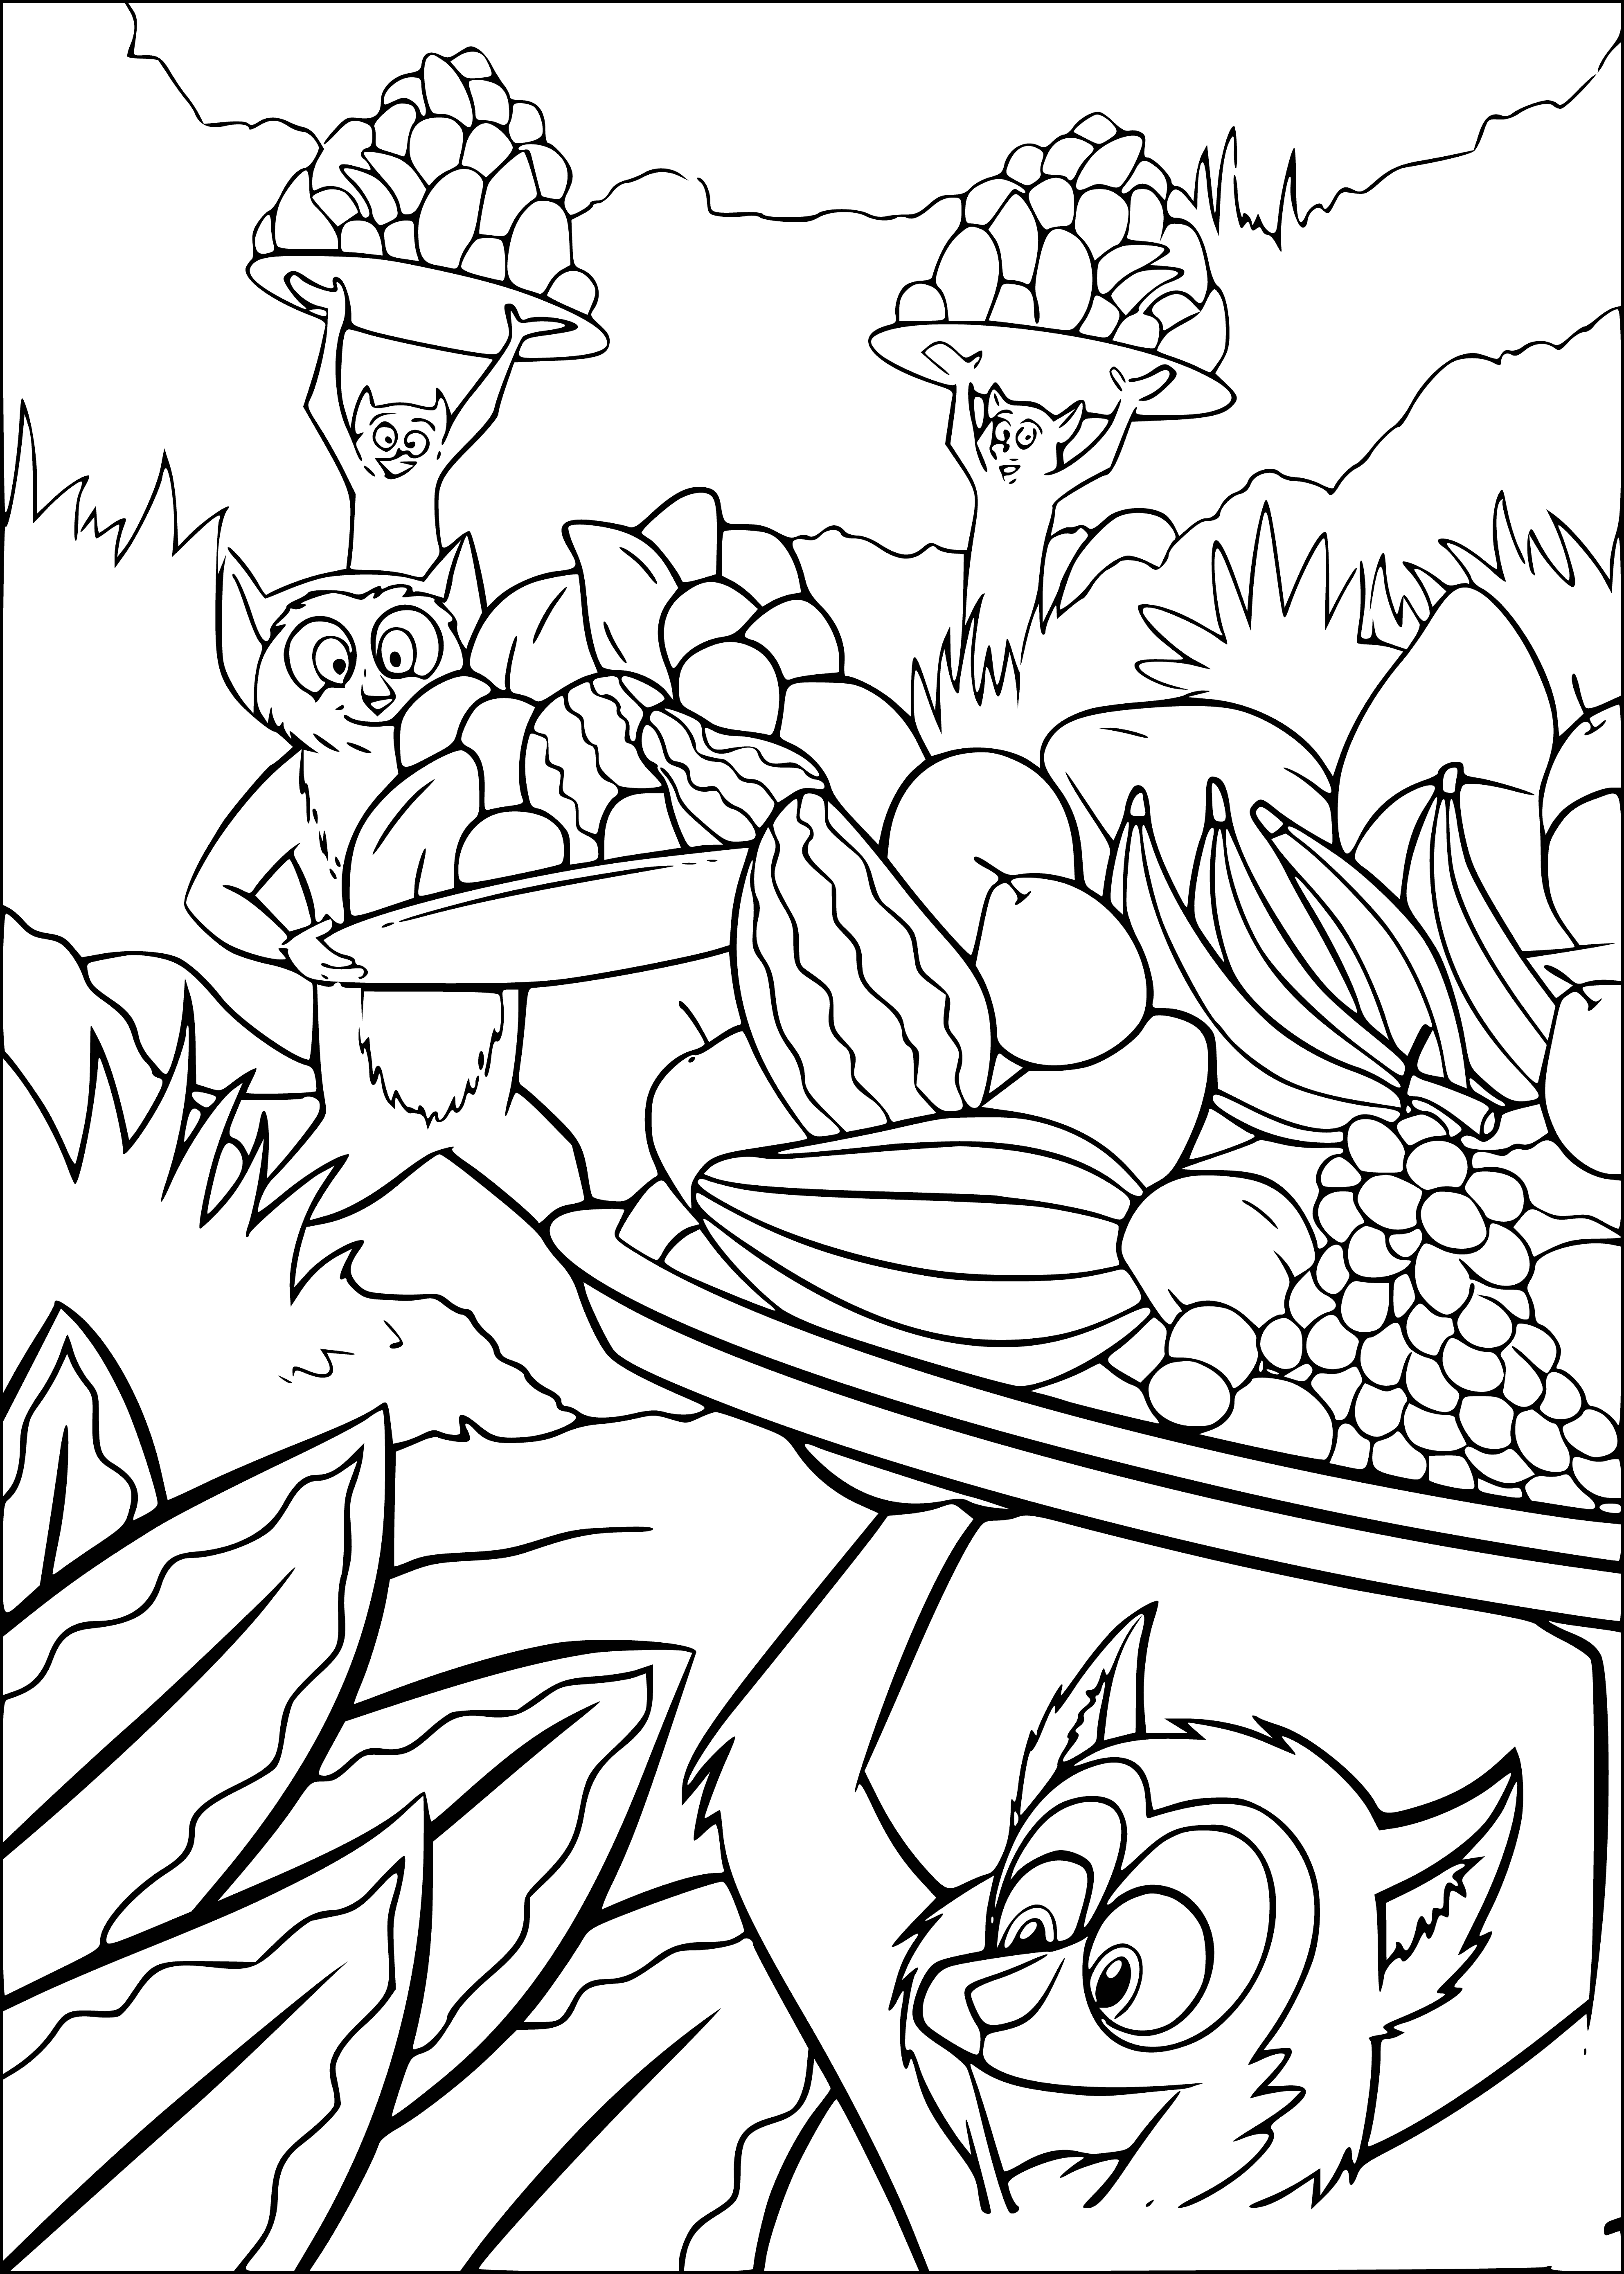 coloring page: Lemurs perched in trees, eating leaves, with long tails.